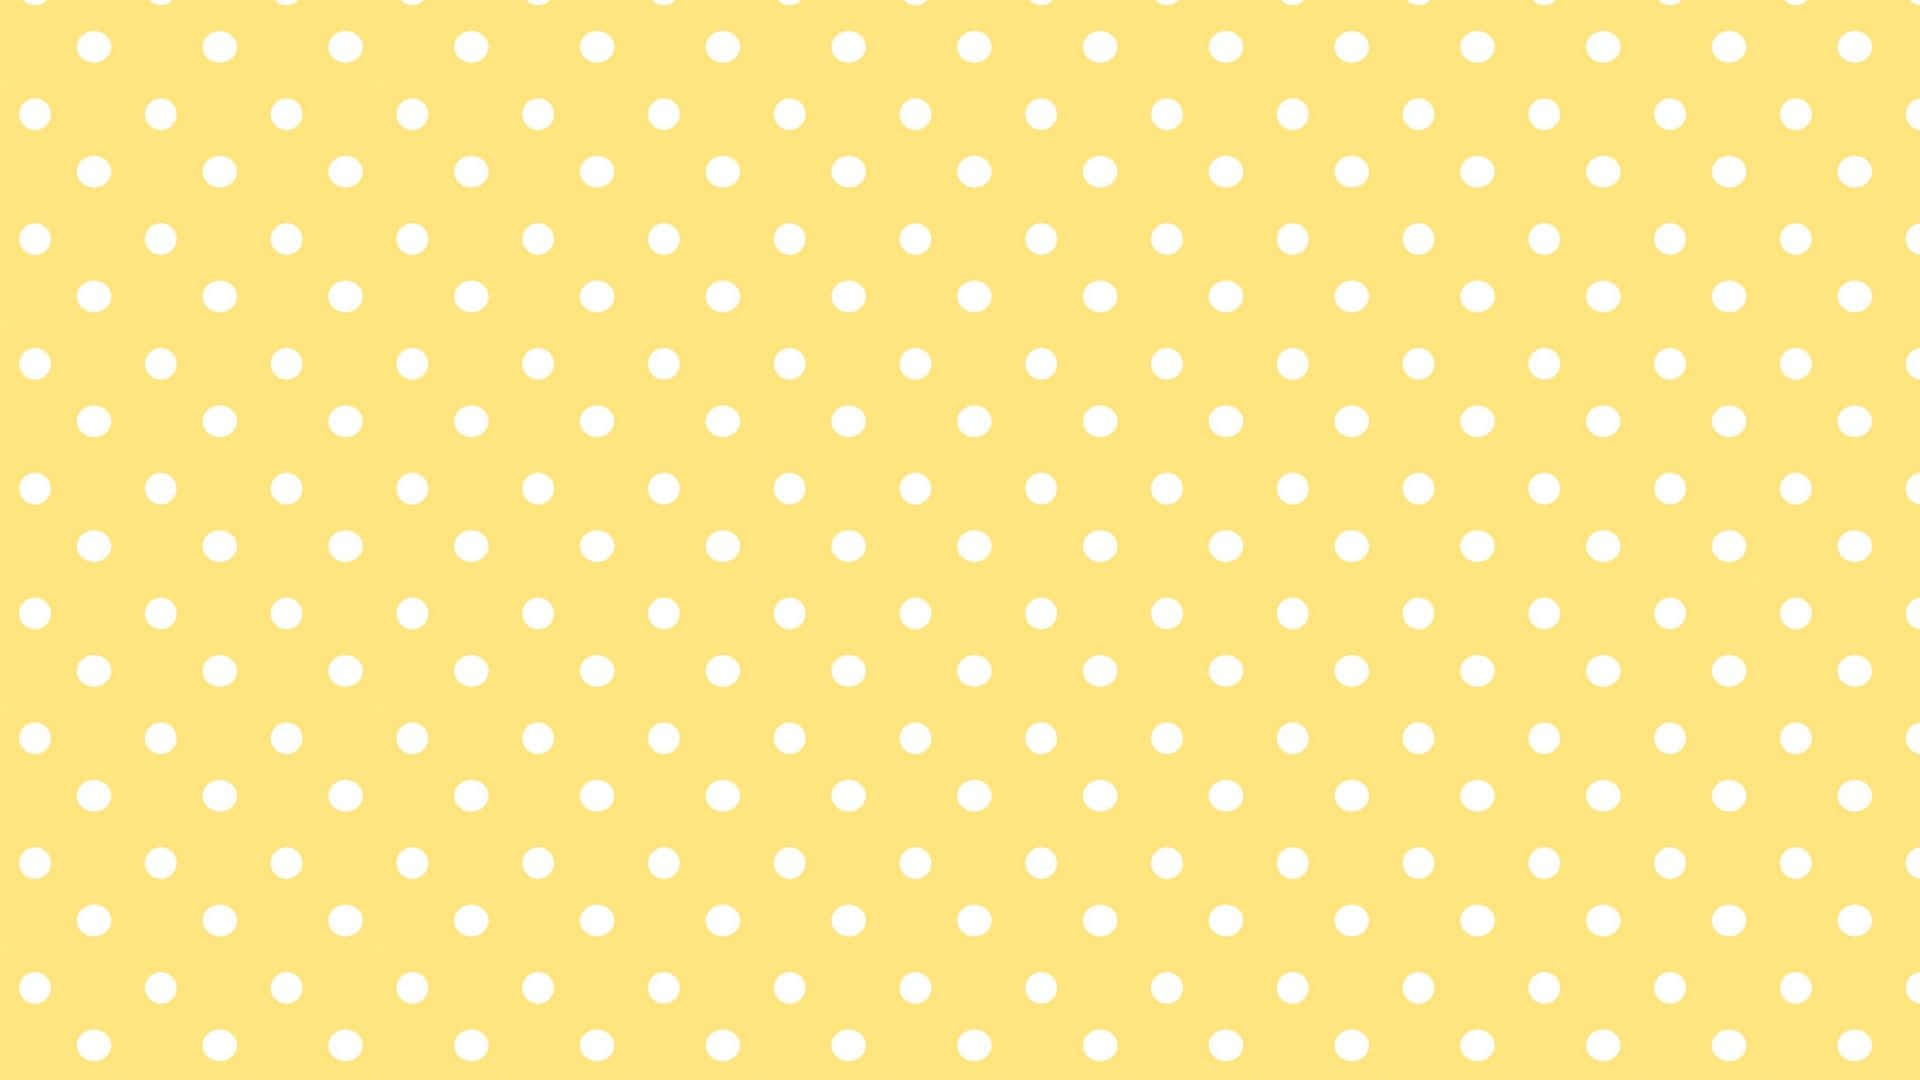 A Yellow Polka Dot Background With White Dots Wallpaper